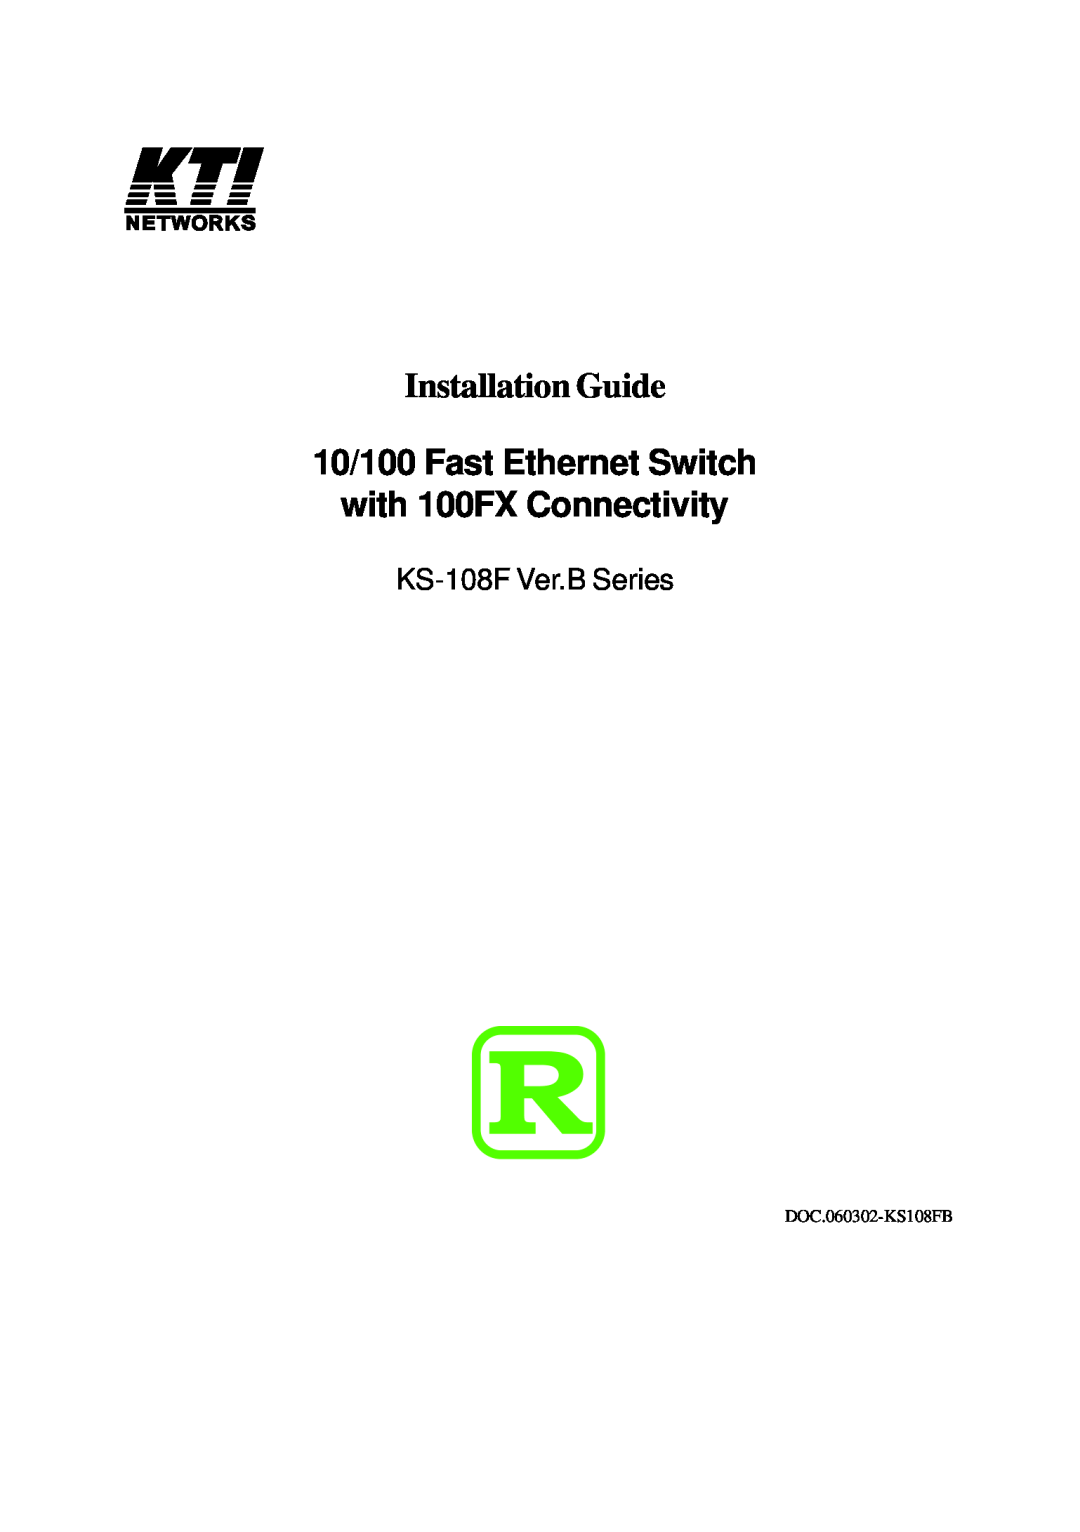 KTI Networks manual Installation Guide, 10/100 Fast Ethernet Switch with 100FX Connectivity, KS-108F Ver.B Series 